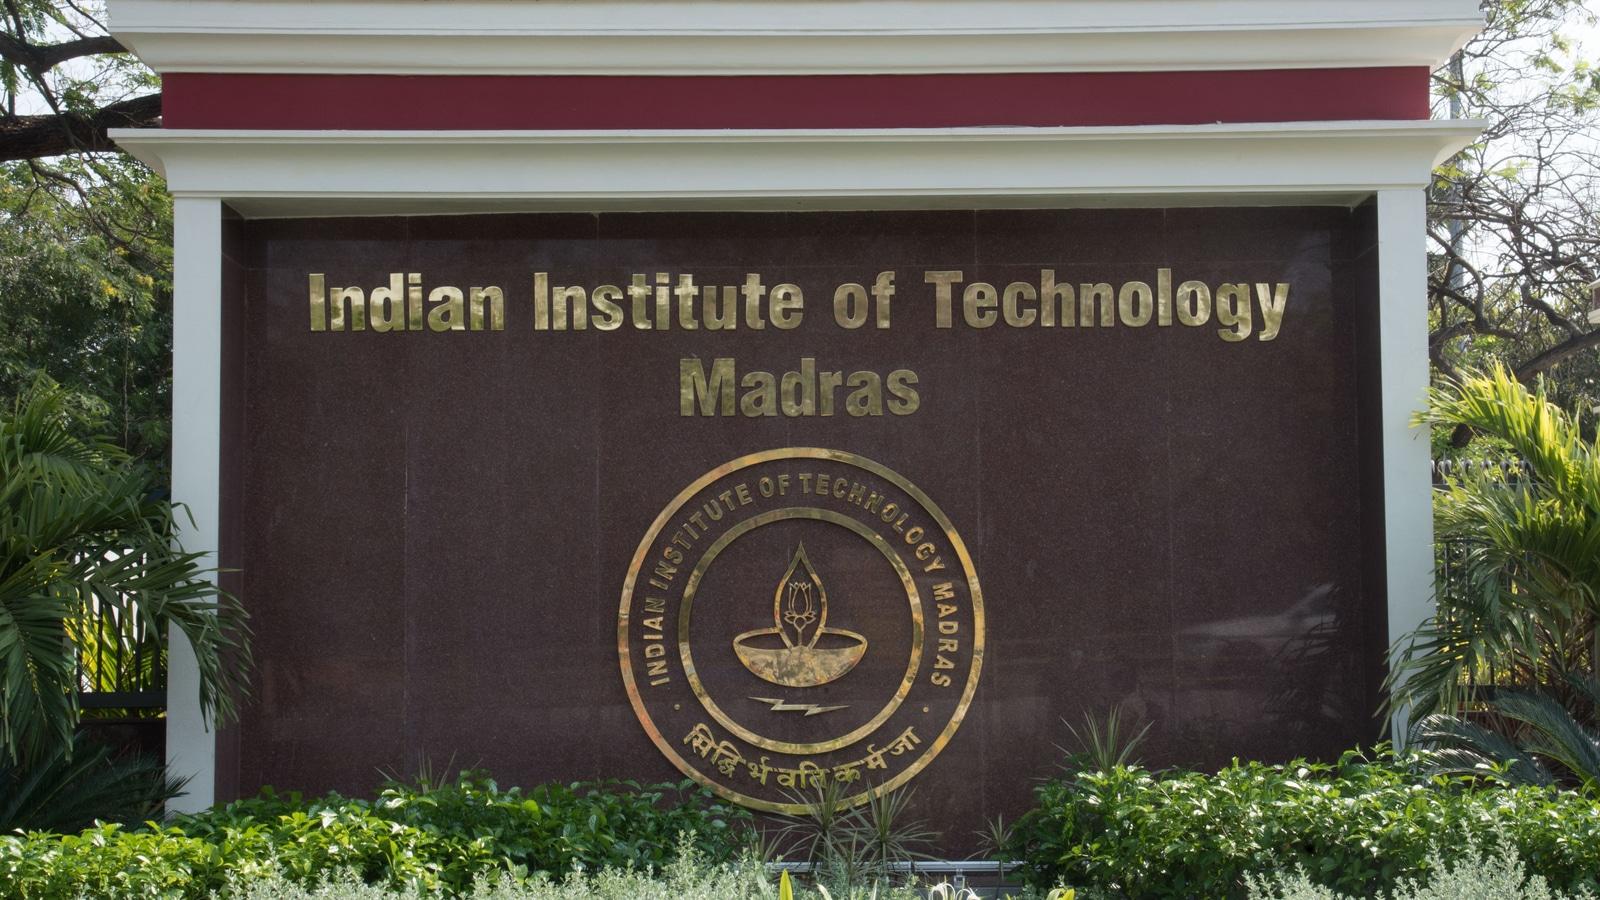 IIT Madras computer science courses now available to the public | Education - Hindustan Times